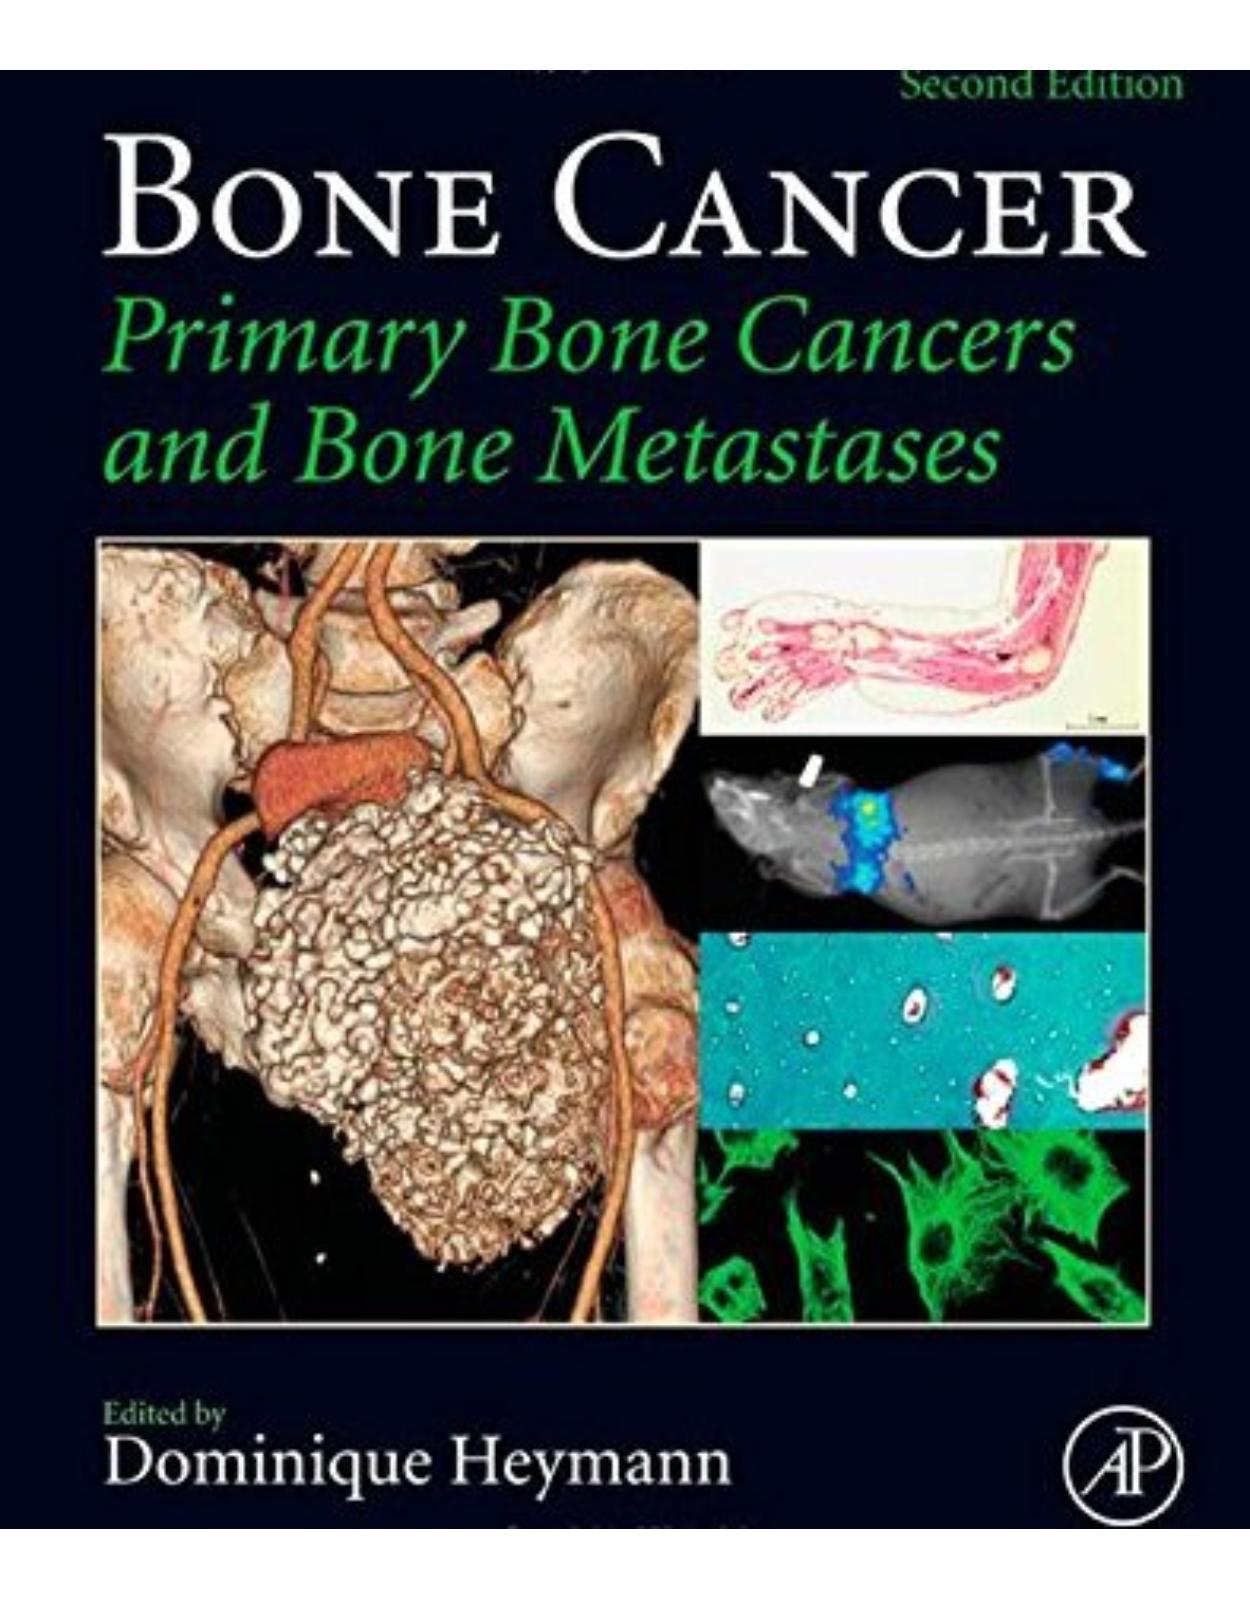 Bone Cancer, Second Edition: Primary Bone Cancers and Bone Metastases